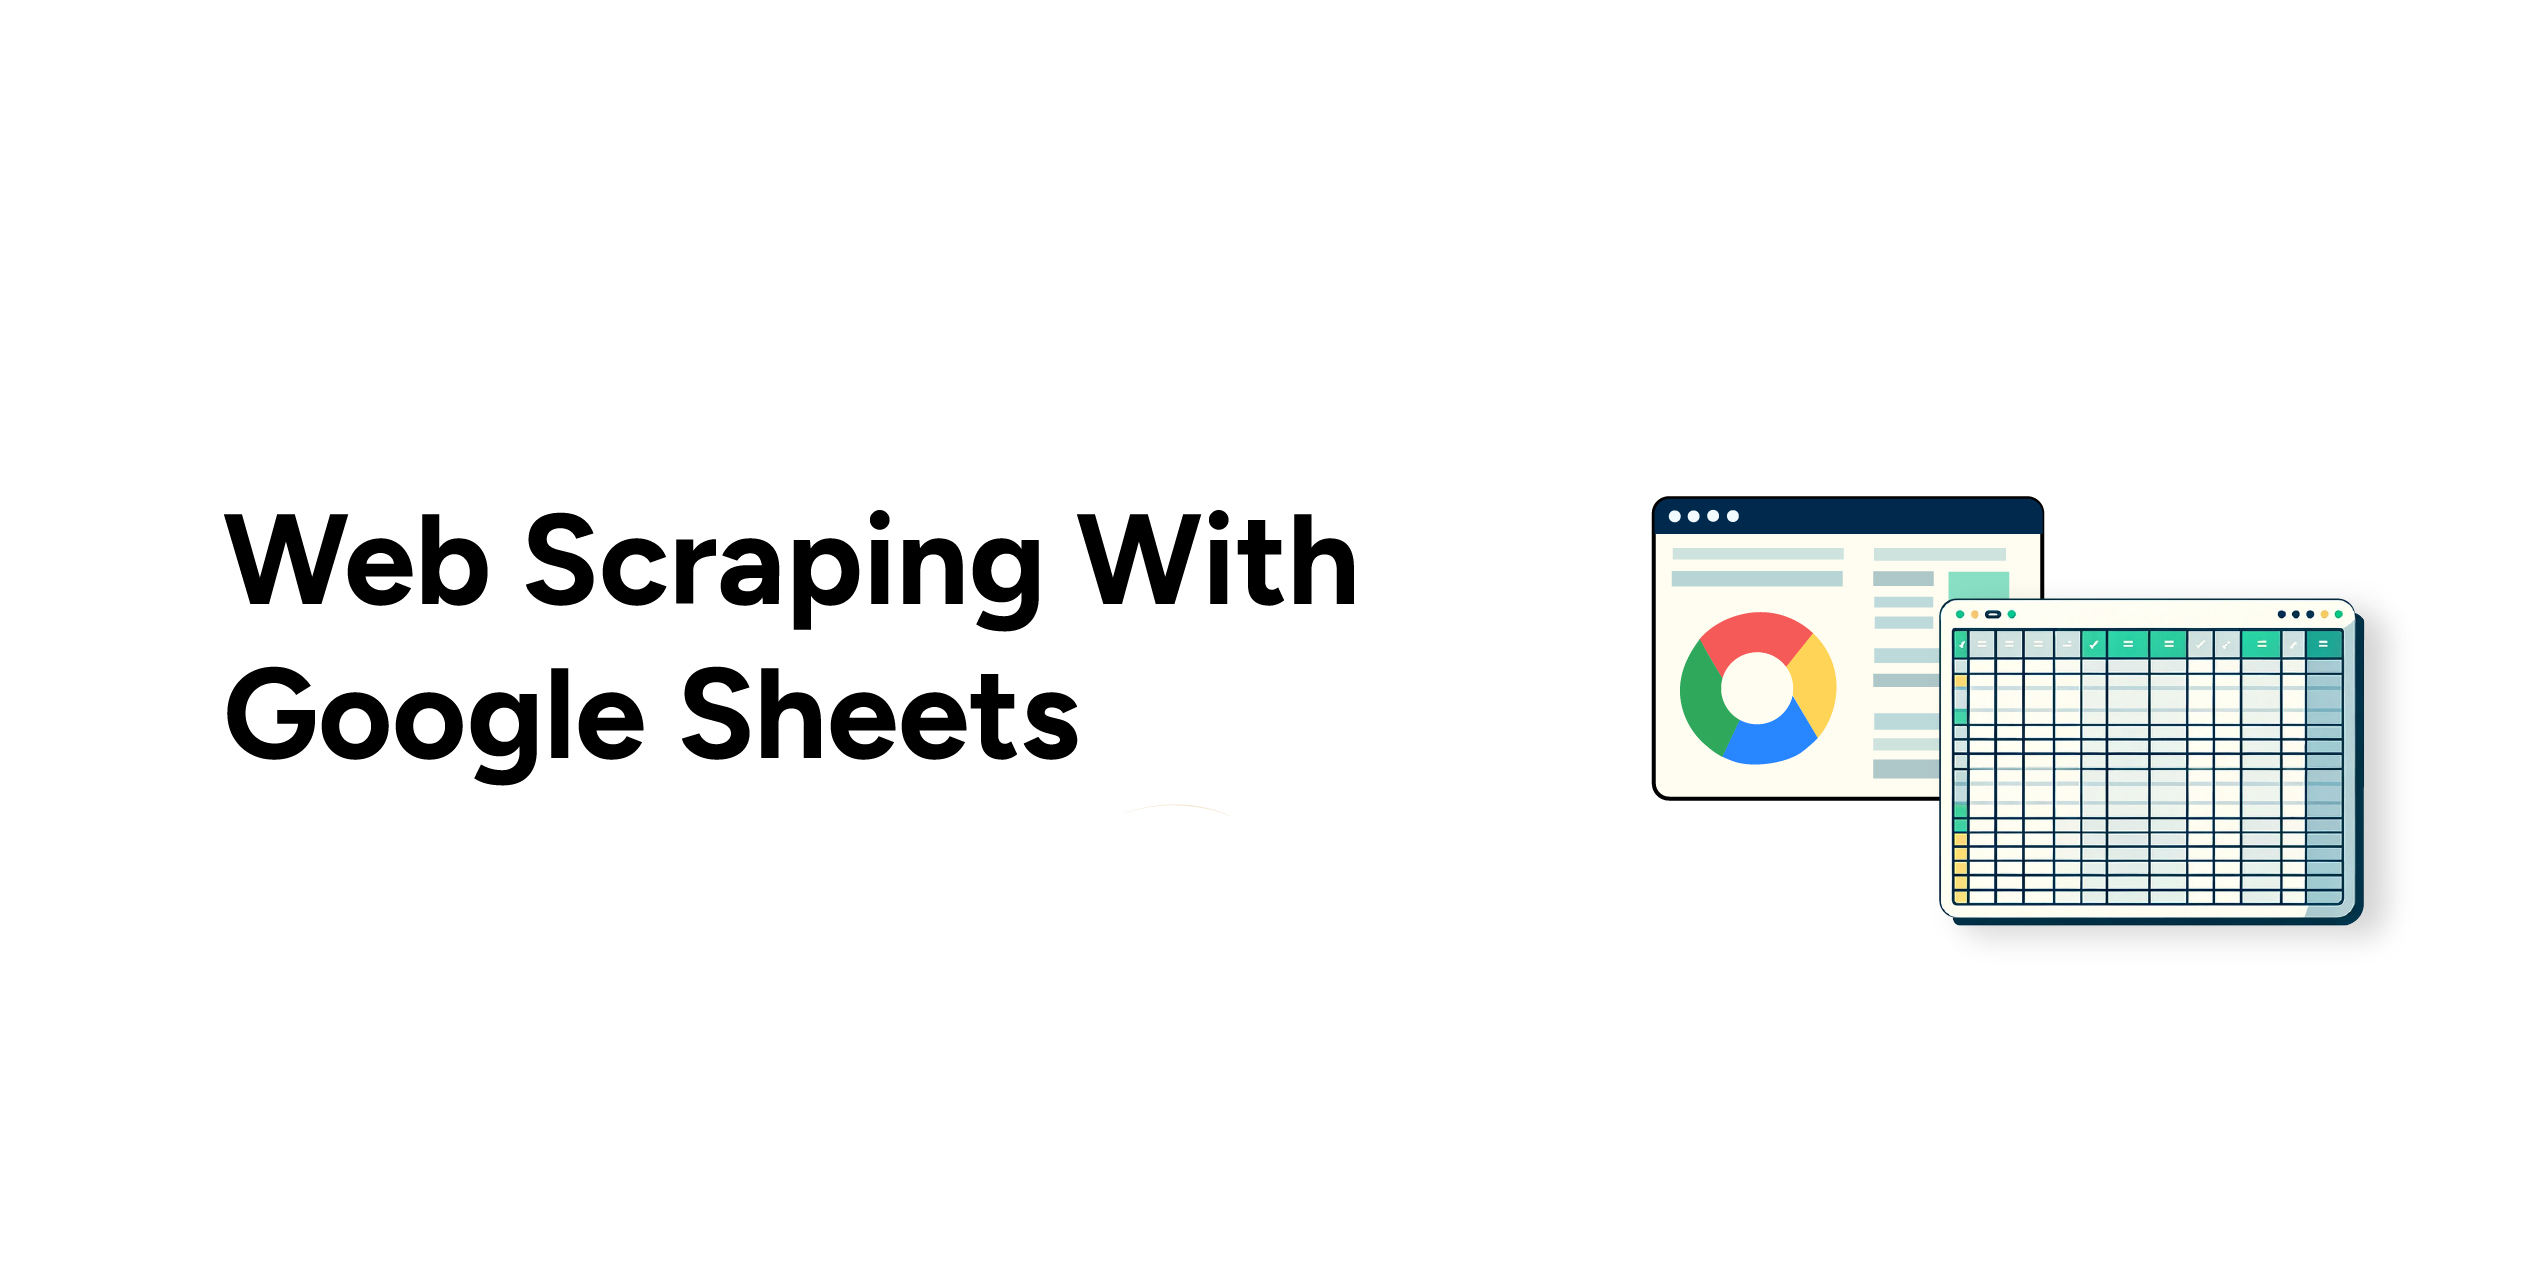 Web Scraping With Google Sheets